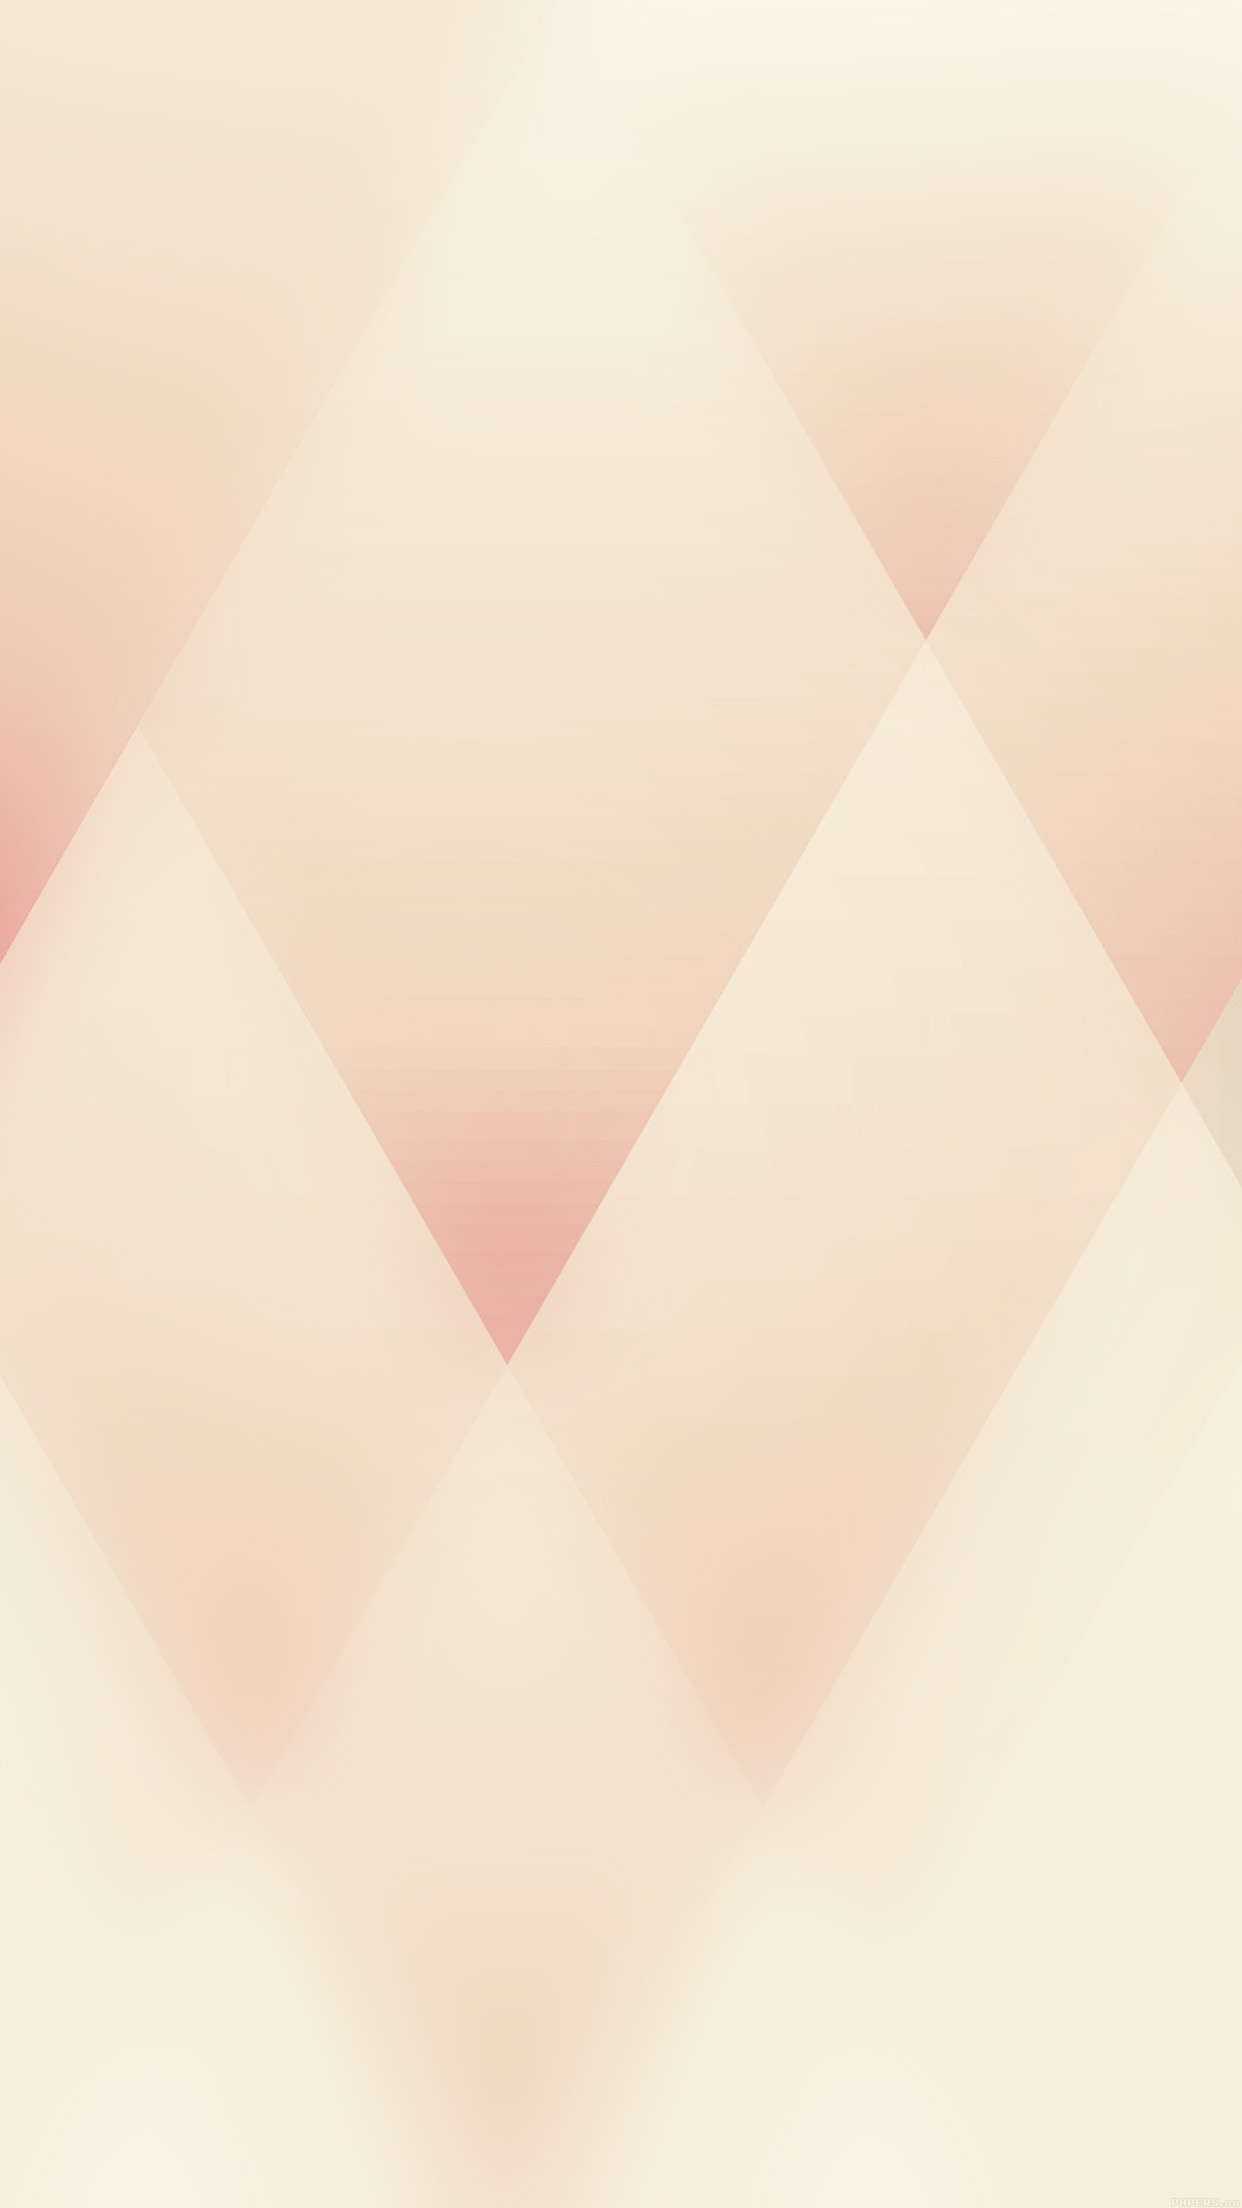 Soft Triangles Abstract Patterns Android wallpaper